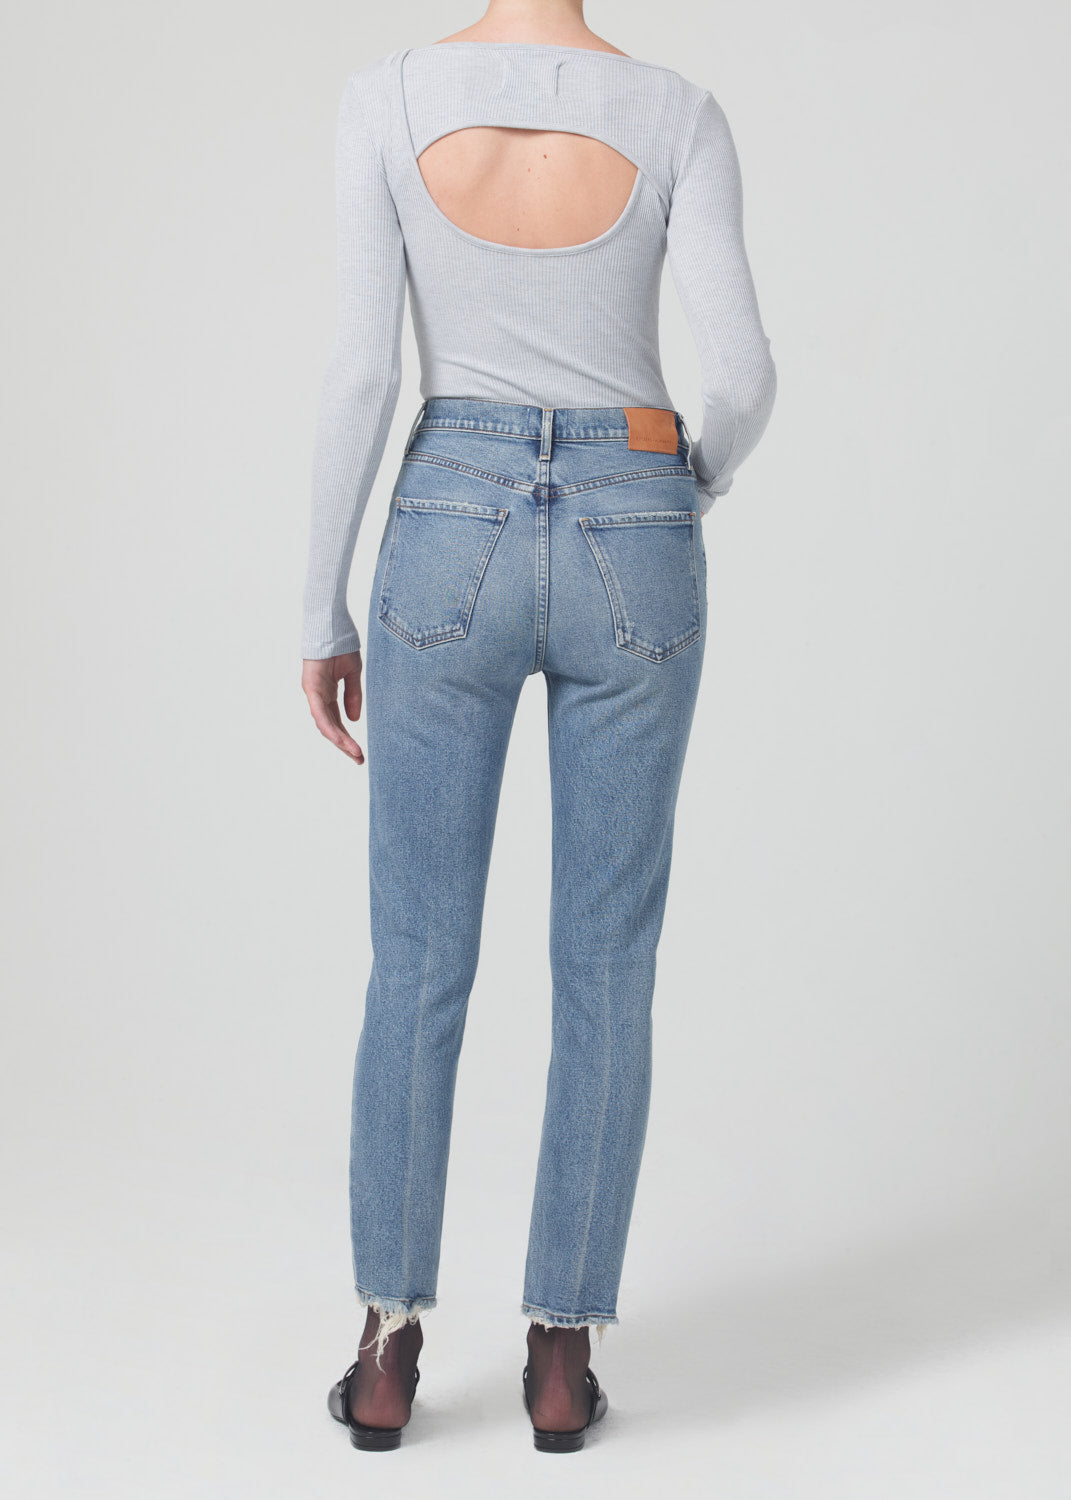 citizens of humanity high rise straight jeans in dimple back